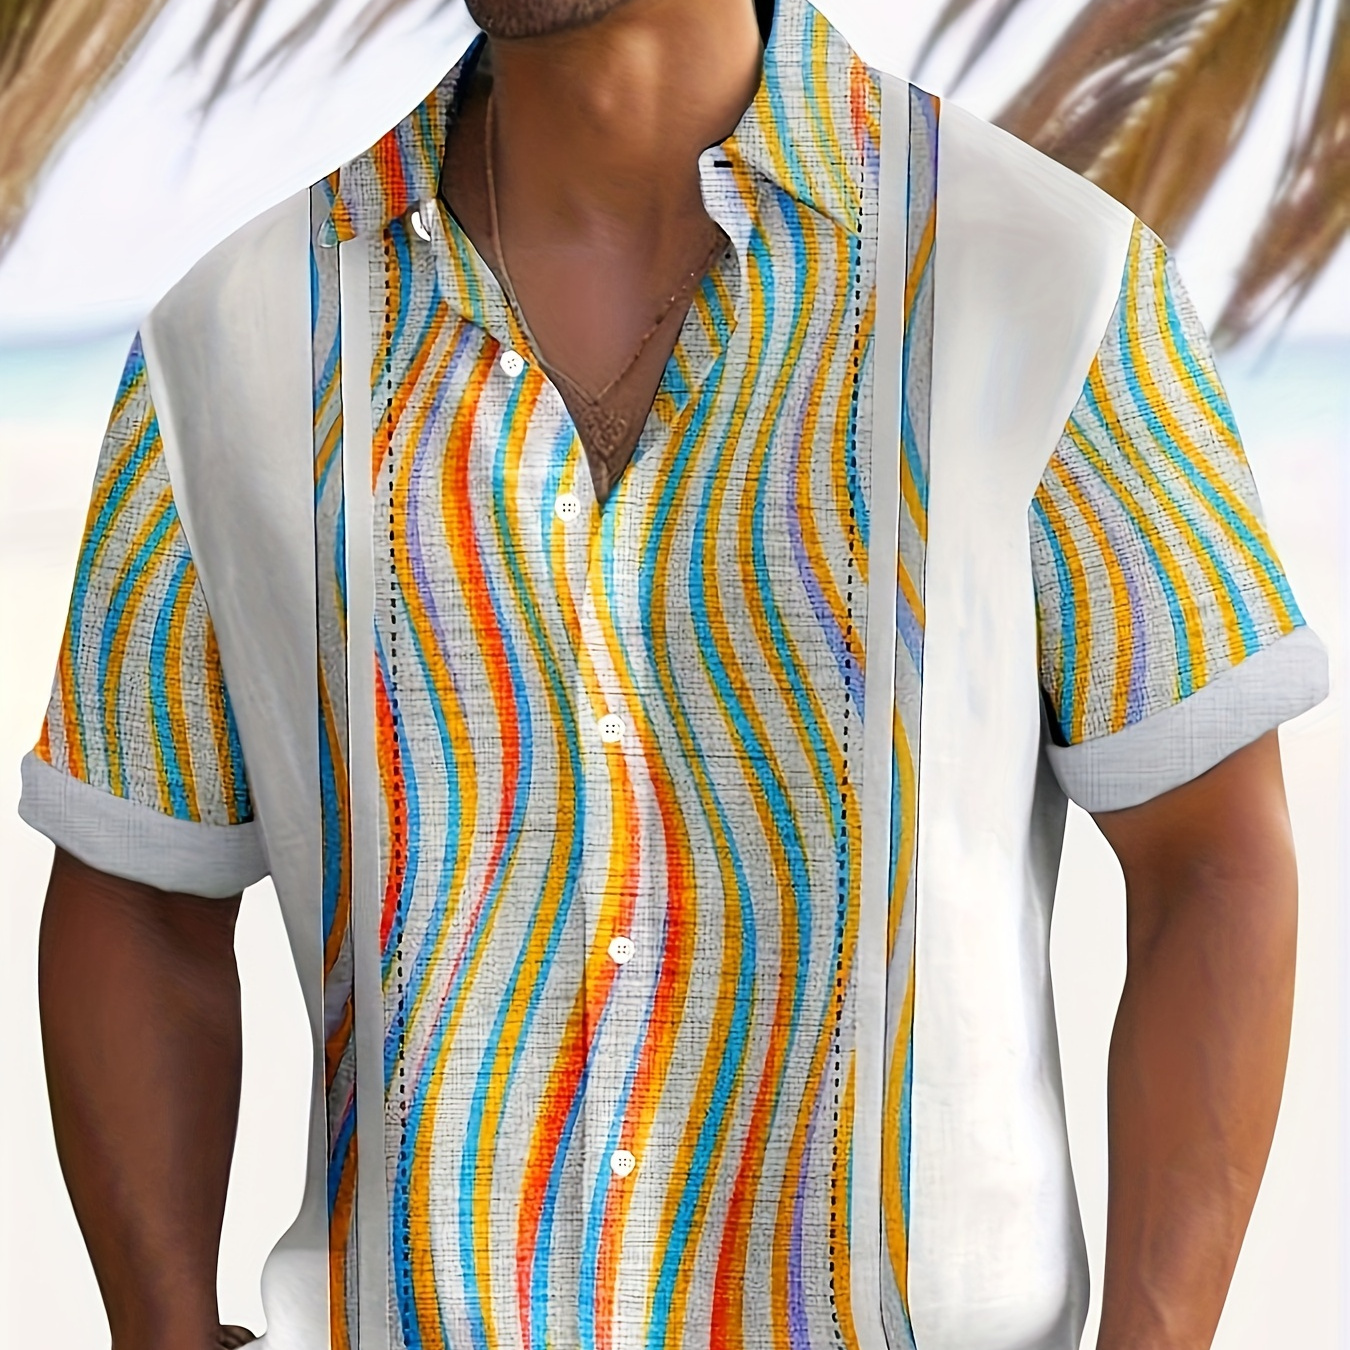 

Plus Size Men's Colorful Fluctuated Stripes Graphic Print Shirt For Summer, Casual Trendy Short Sleeve Shirt For Males